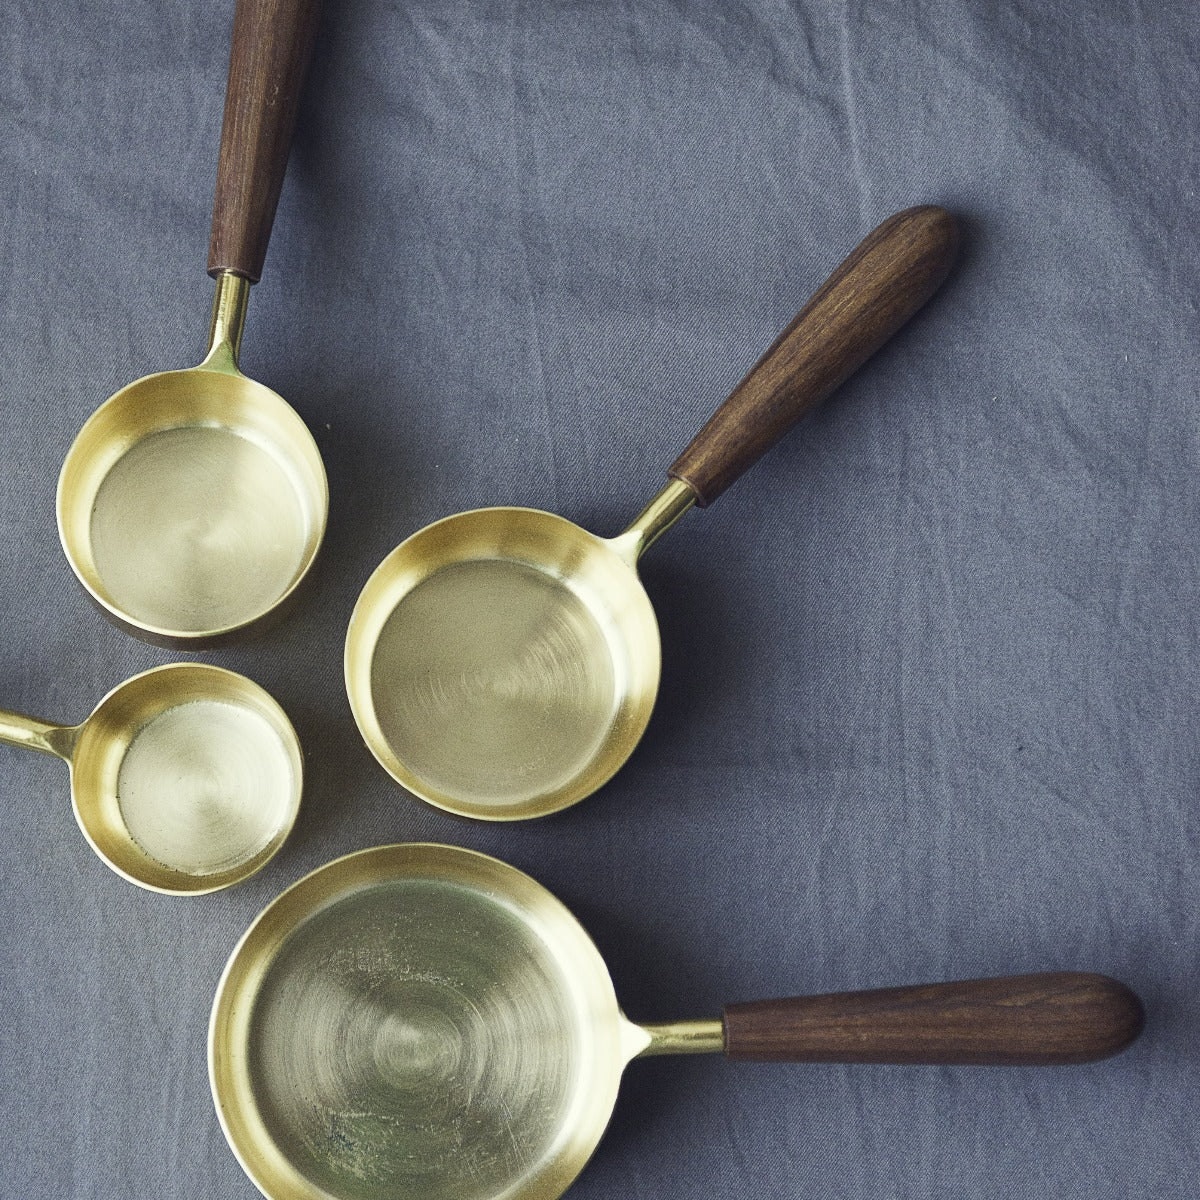 Gold &amp; Wood Measuring Cups, Set of 4